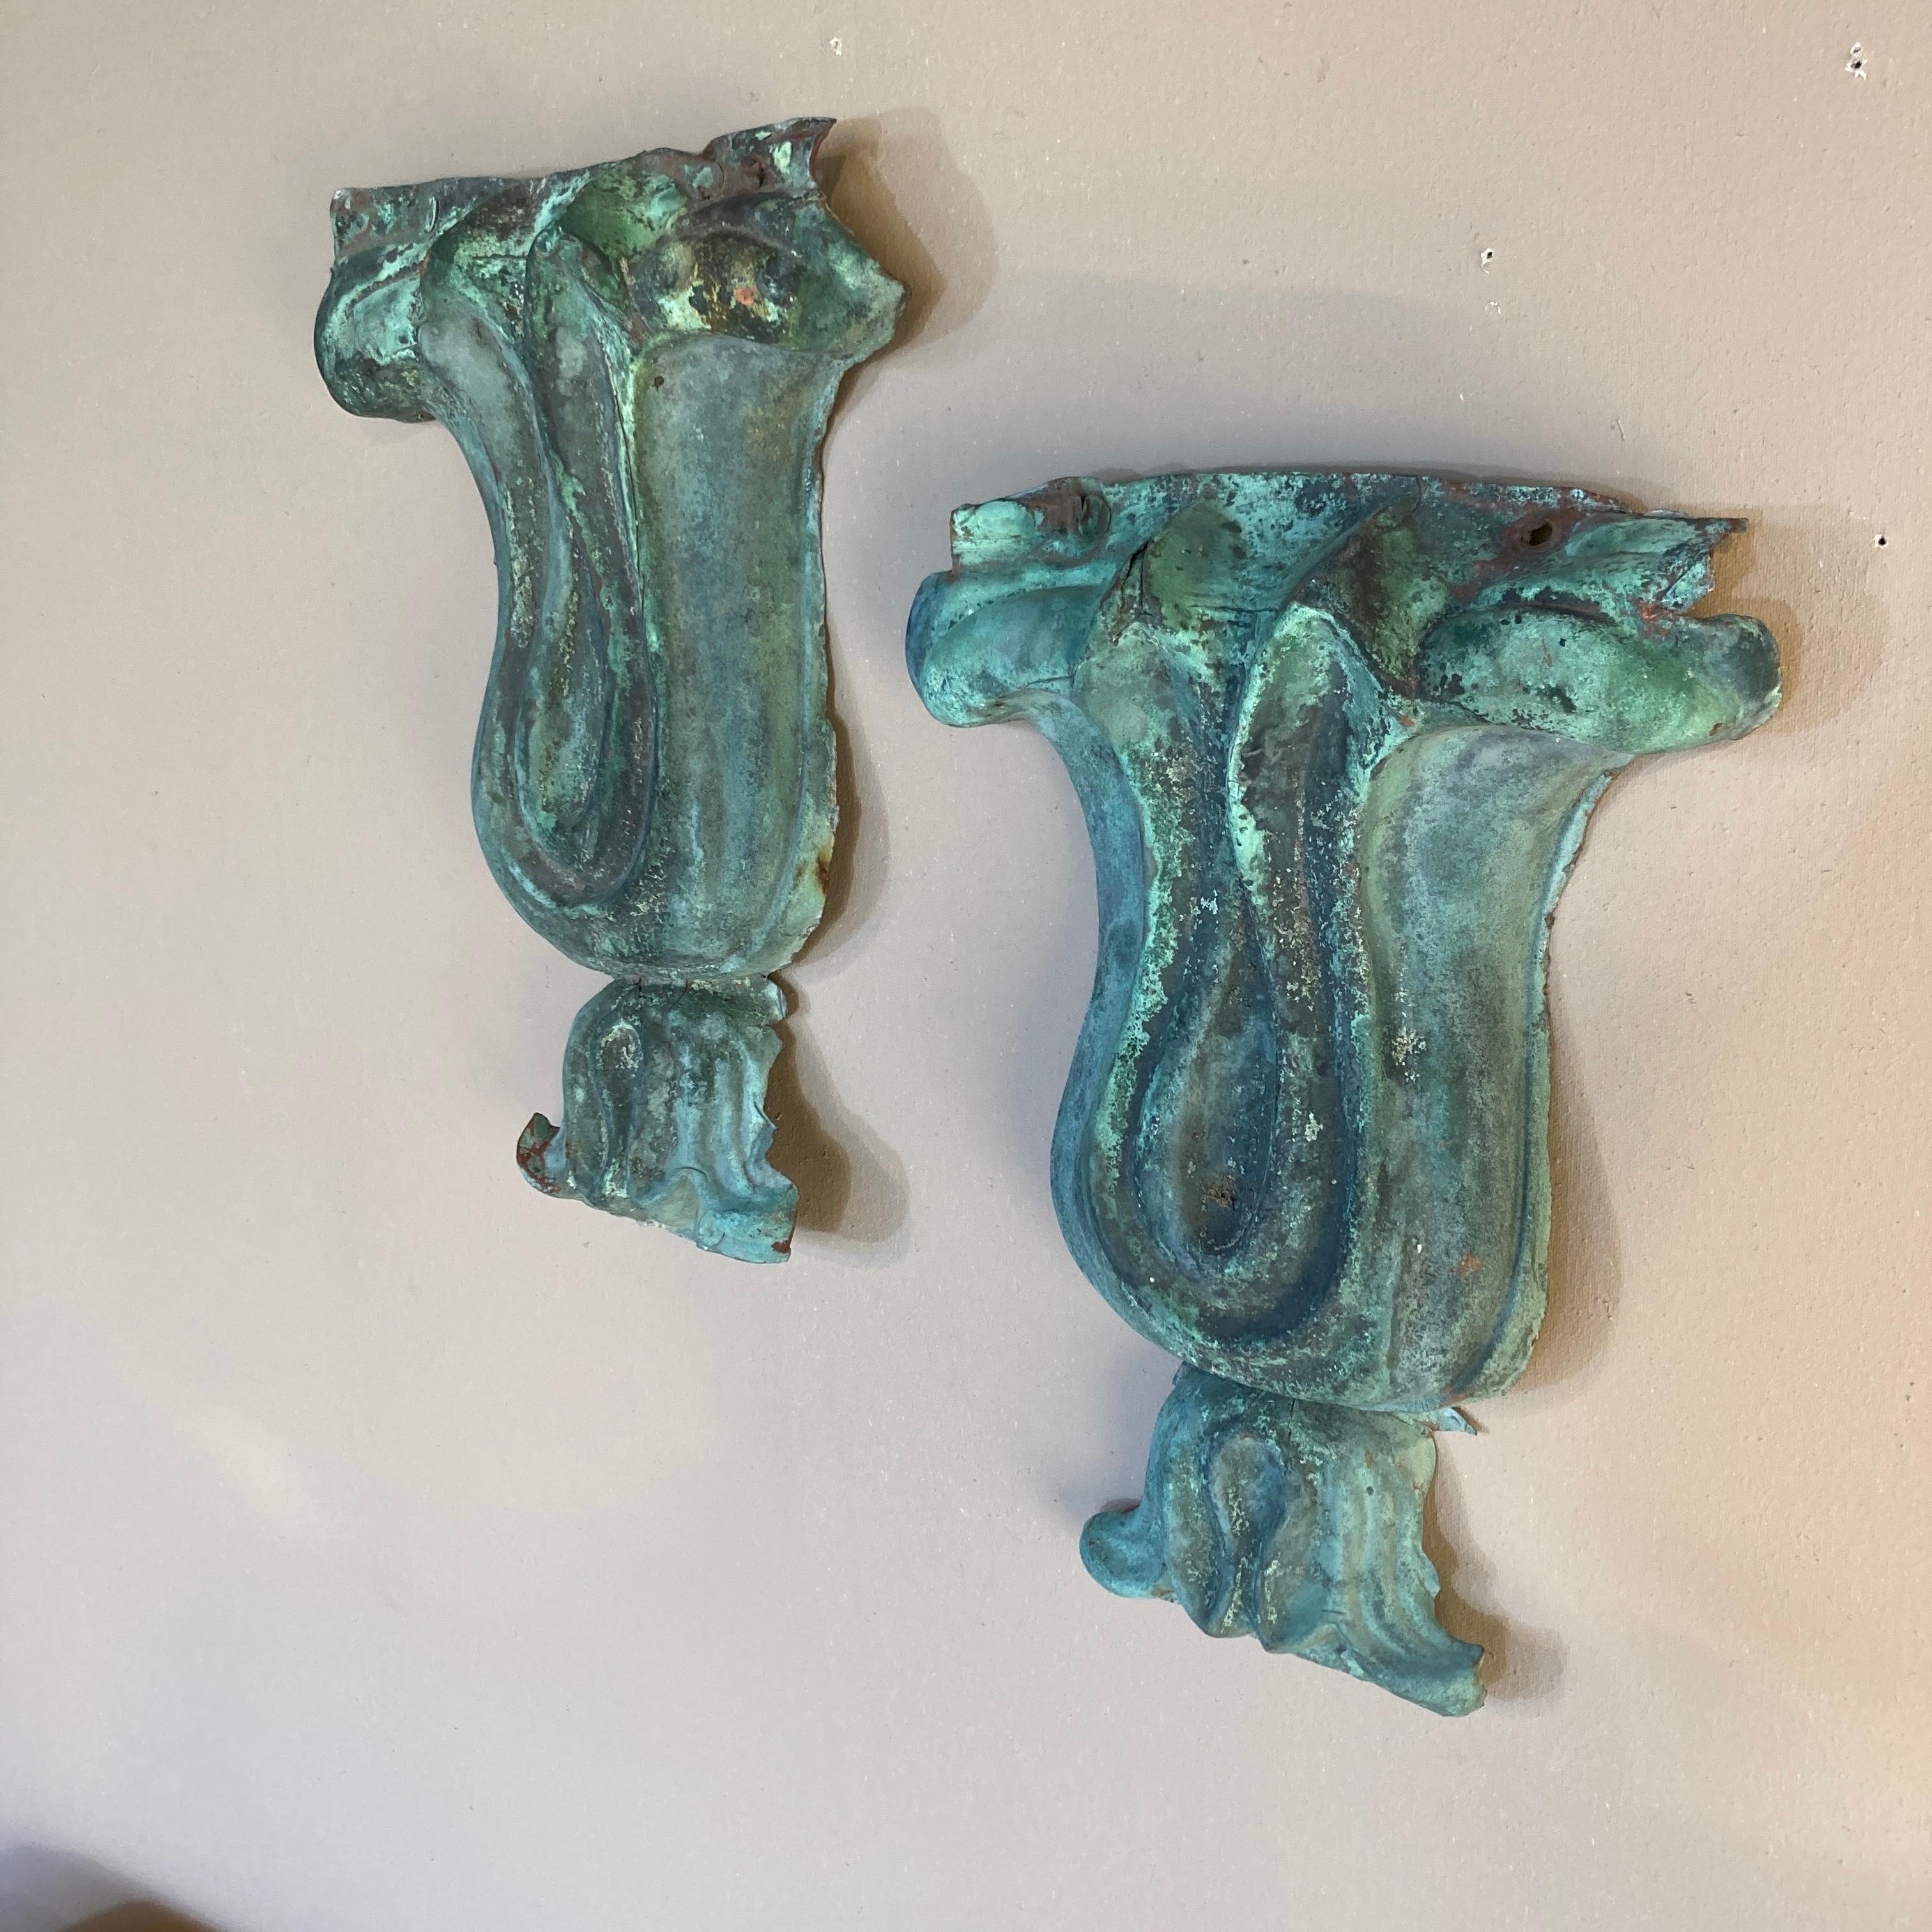 19th Century American Molded Verdigris Copper Urn Architectural Ornaments Pair In Excellent Condition For Sale In Lambertville, NJ